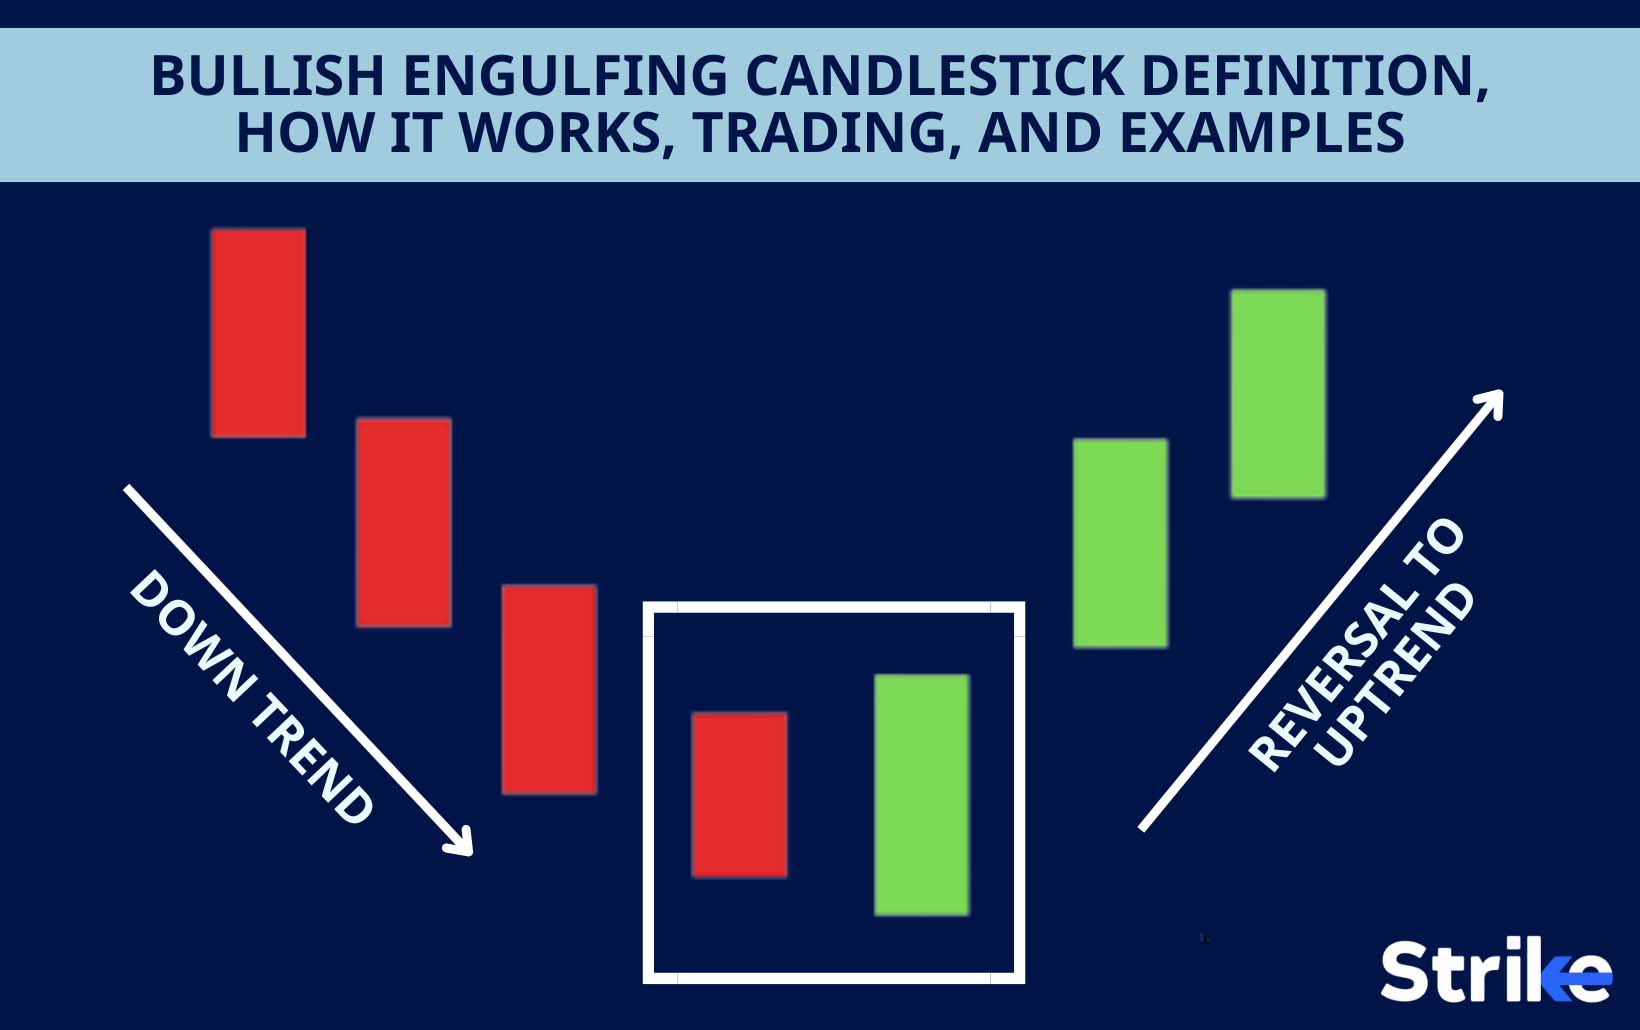 Bullish Engulfing Candlestick: Definition, How it Works, Trading, and Examples